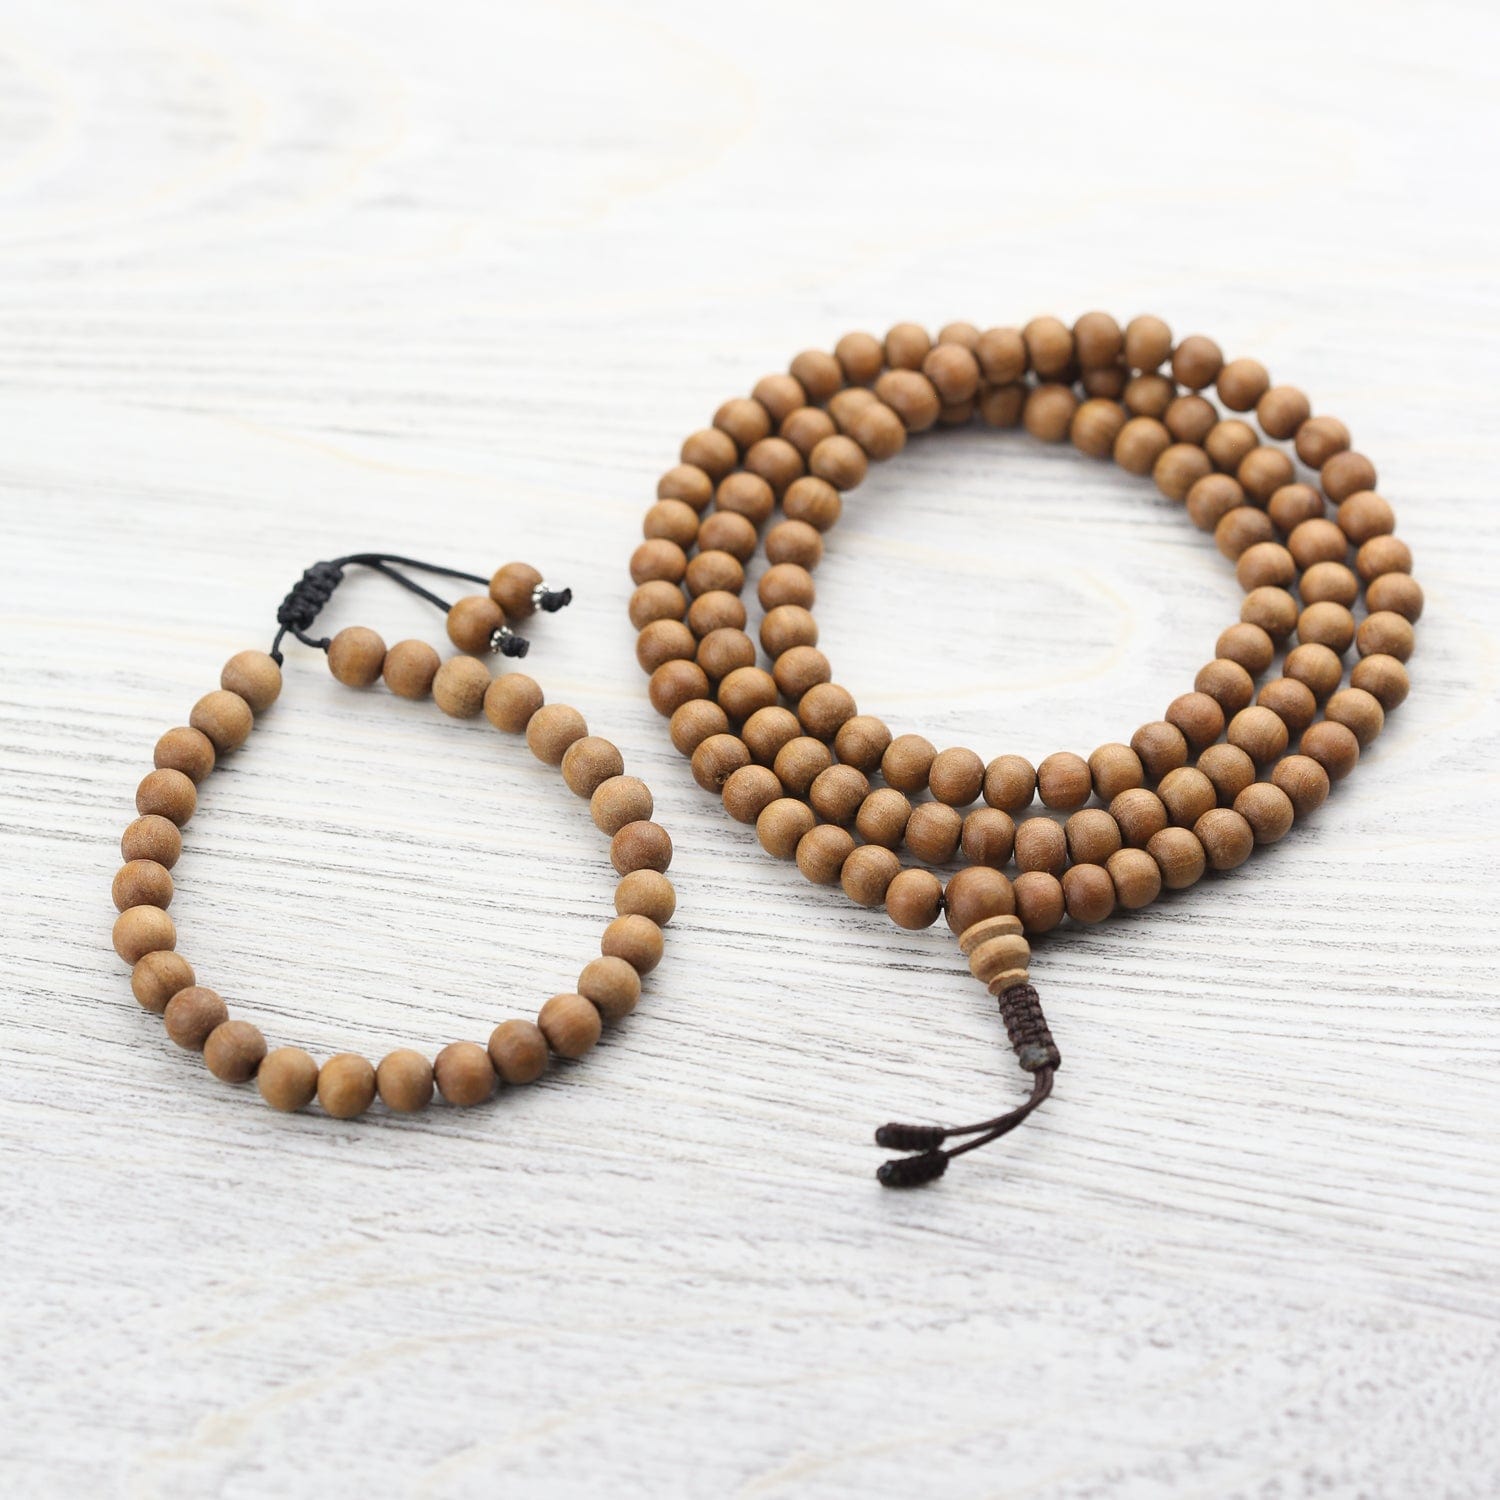 Genuine Nepali Bodhi Bead - Browse Collection